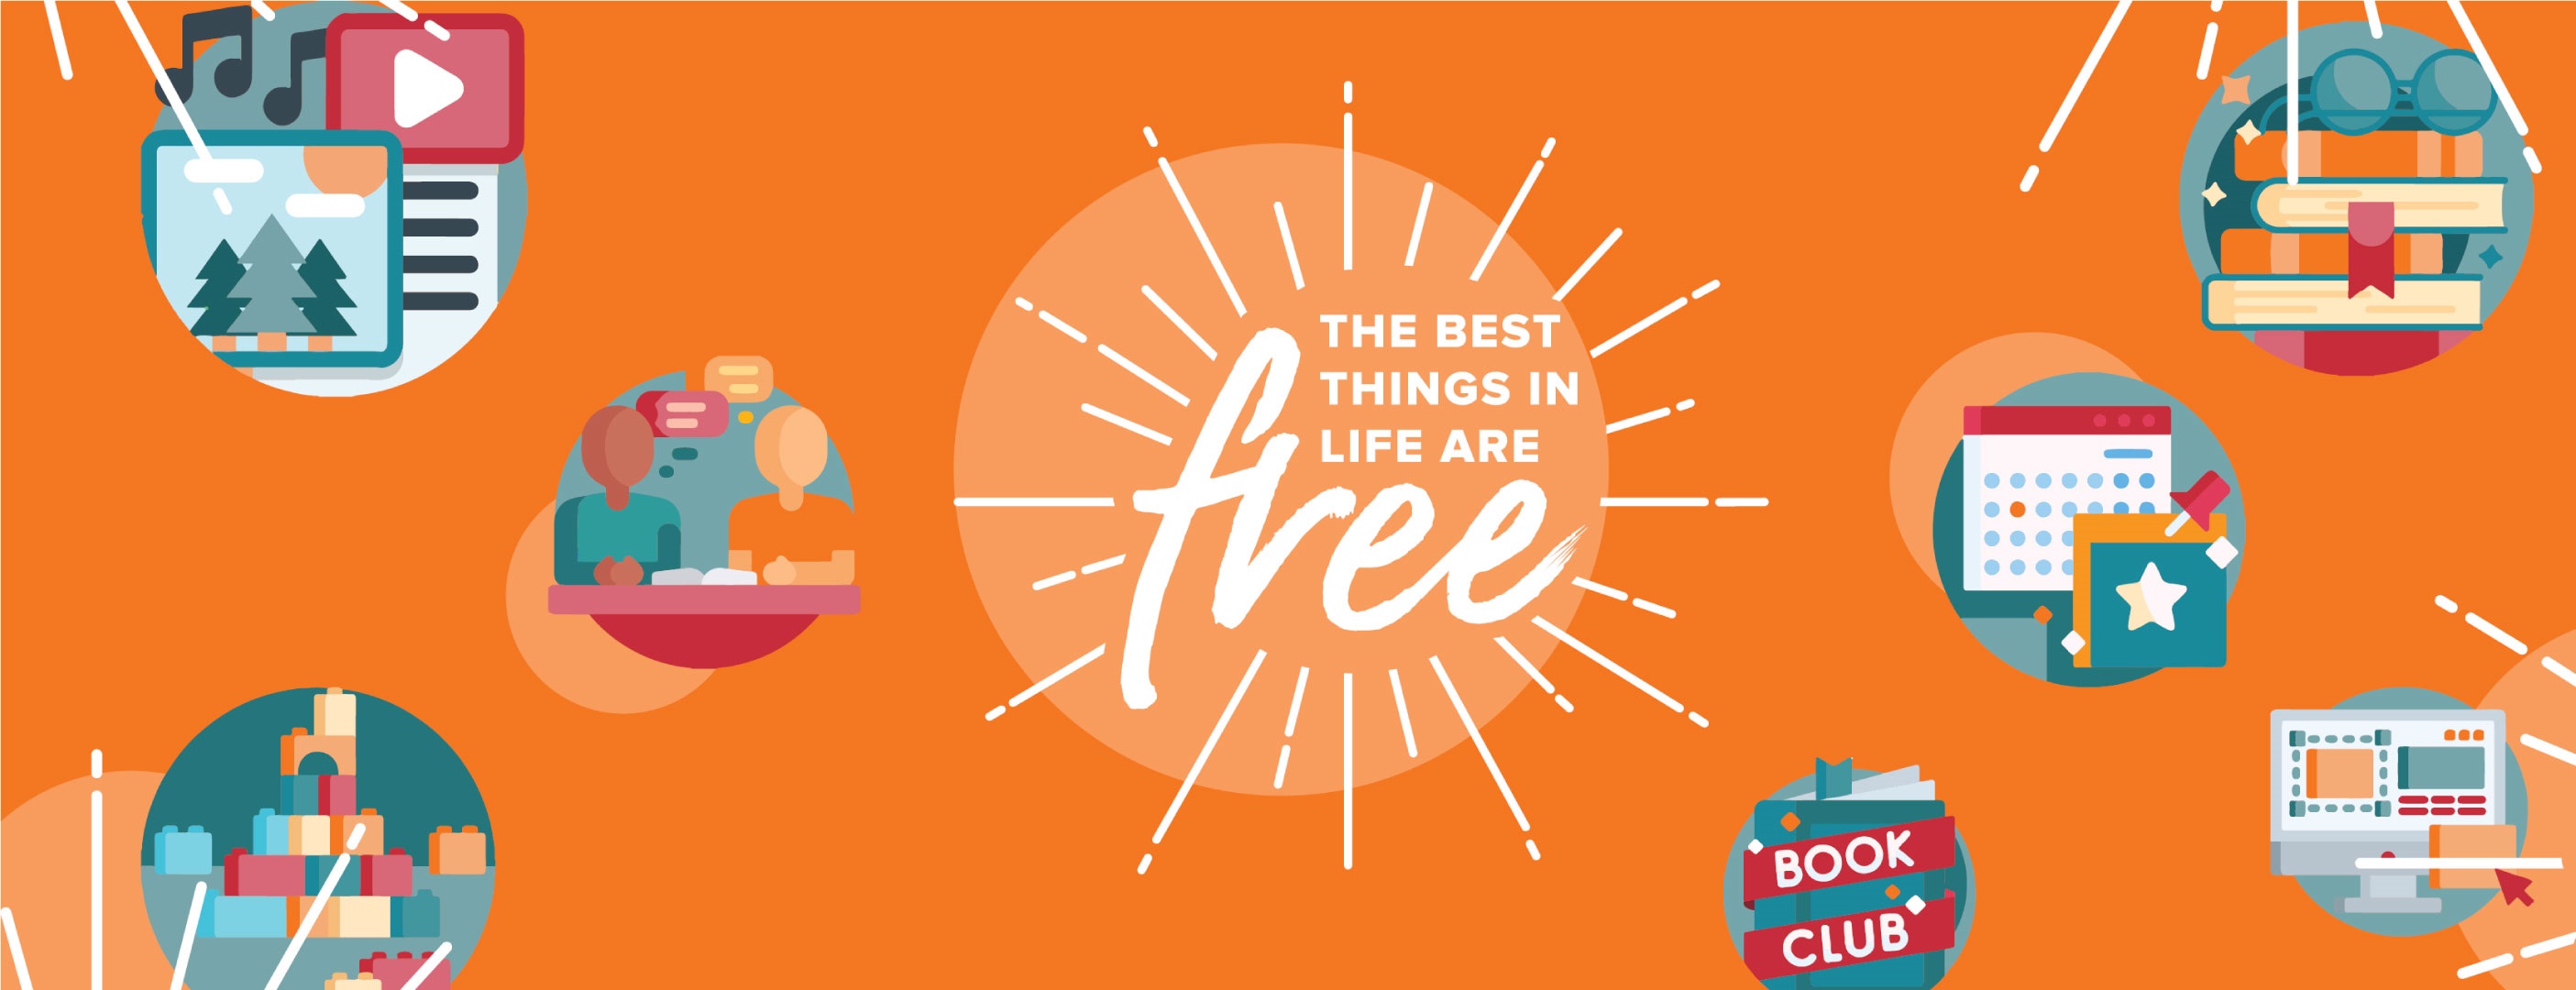 The best things in life are free website banner